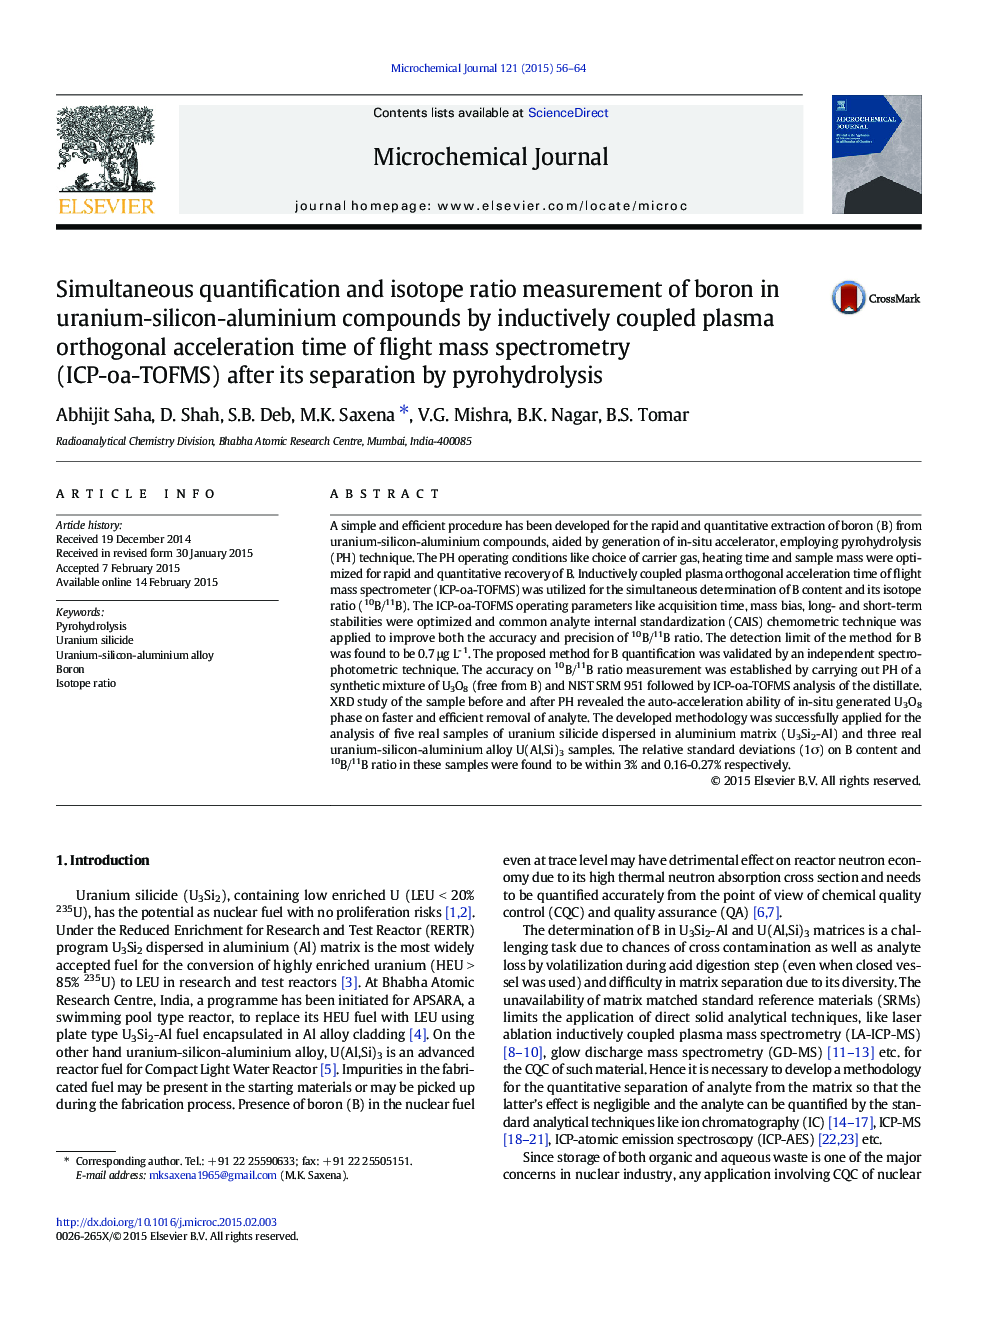 Simultaneous quantification and isotope ratio measurement of boron in uranium-silicon-aluminium compounds by inductively coupled plasma orthogonal acceleration time of flight mass spectrometry (ICP-oa-TOFMS) after its separation by pyrohydrolysis